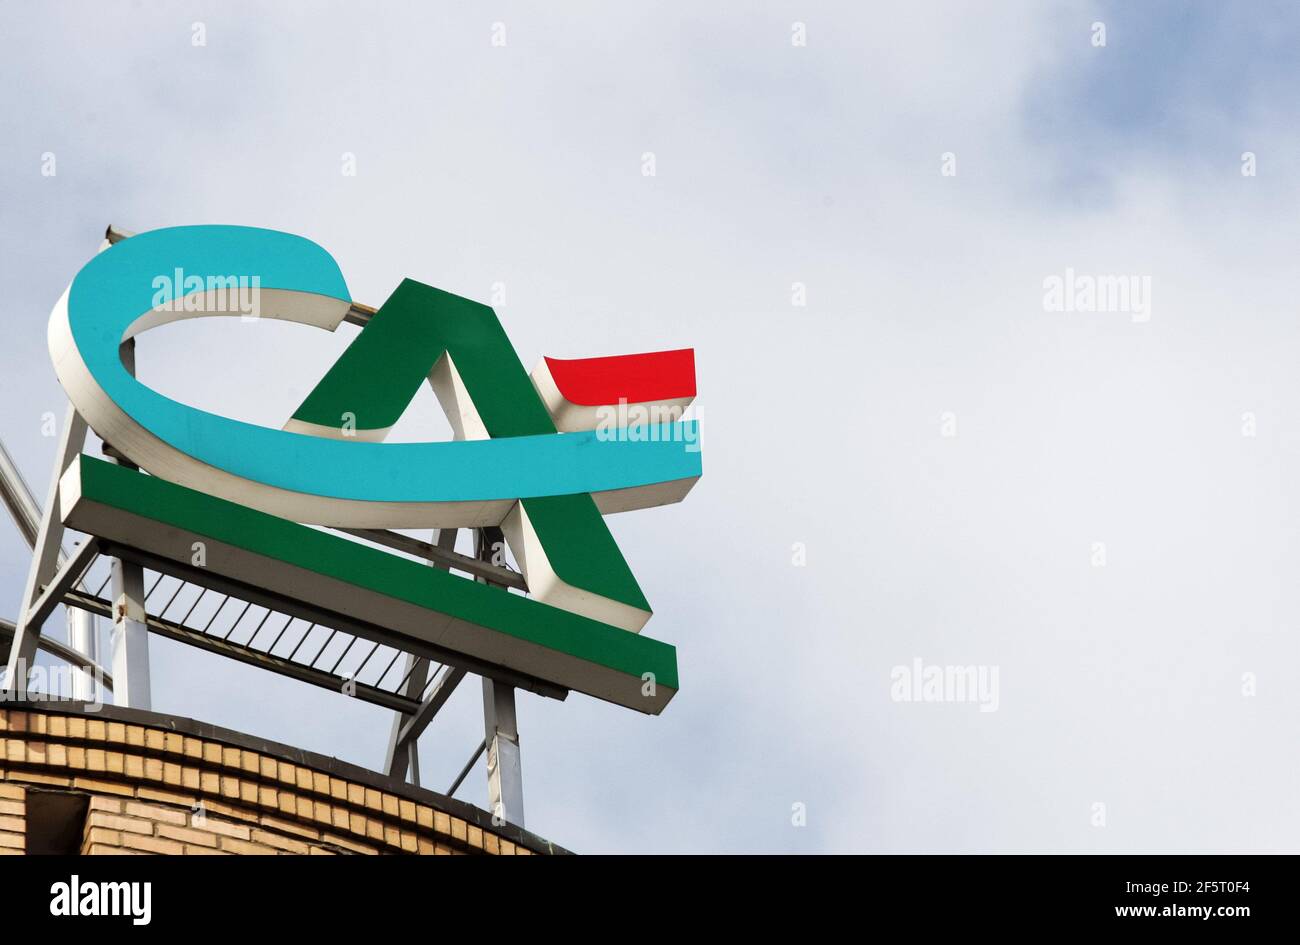 Page 5 - Credit Agricole High Resolution Stock Photography and Images -  Alamy